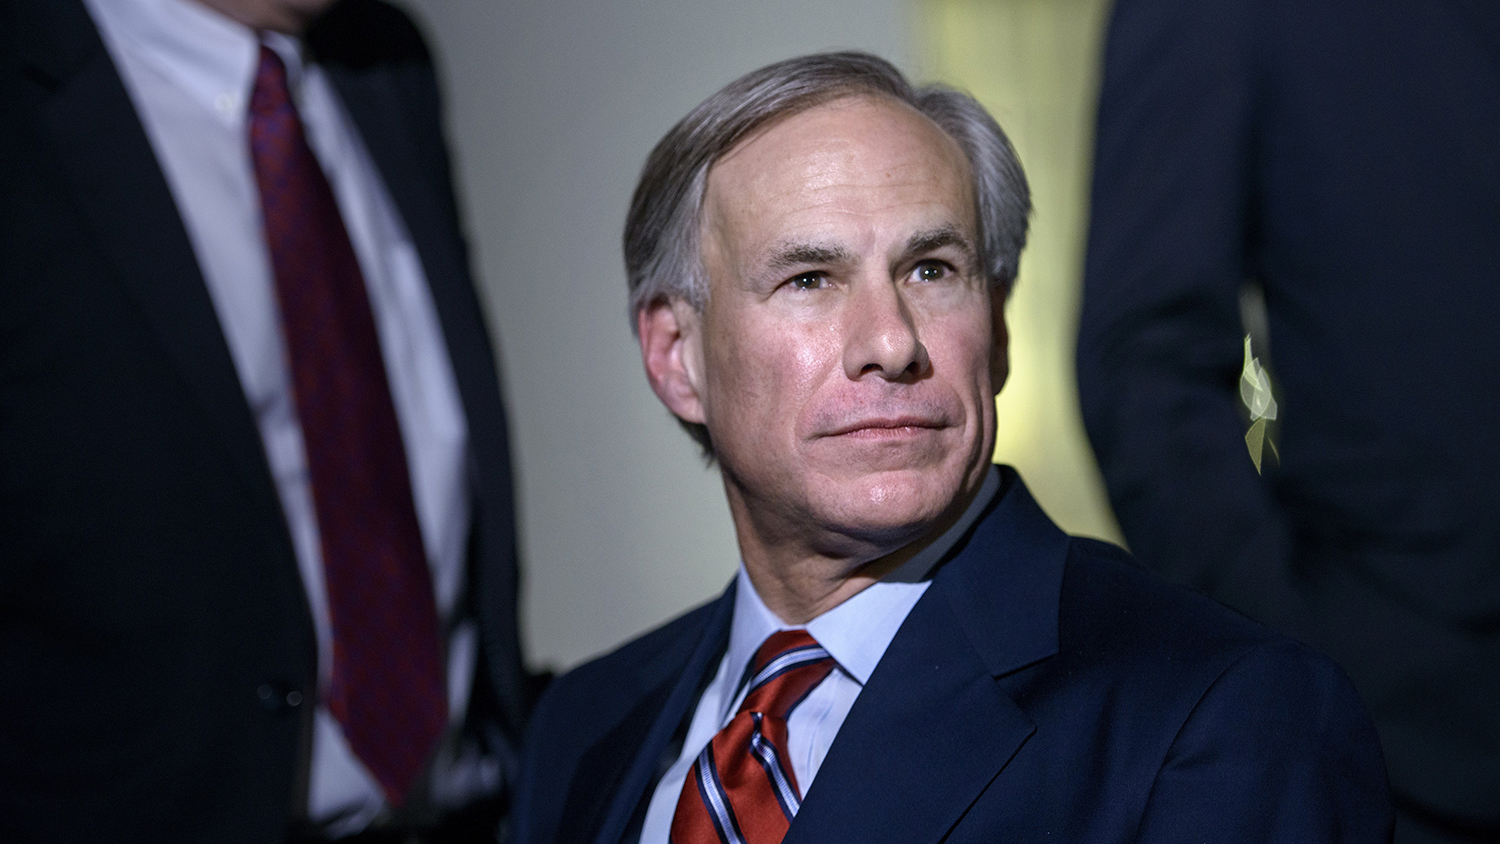 Texas Governor-Elect Greg Abbott (R-TX) listens to questions from the press after a meeting at the White House December 5, 2014 in Washington, DC.
